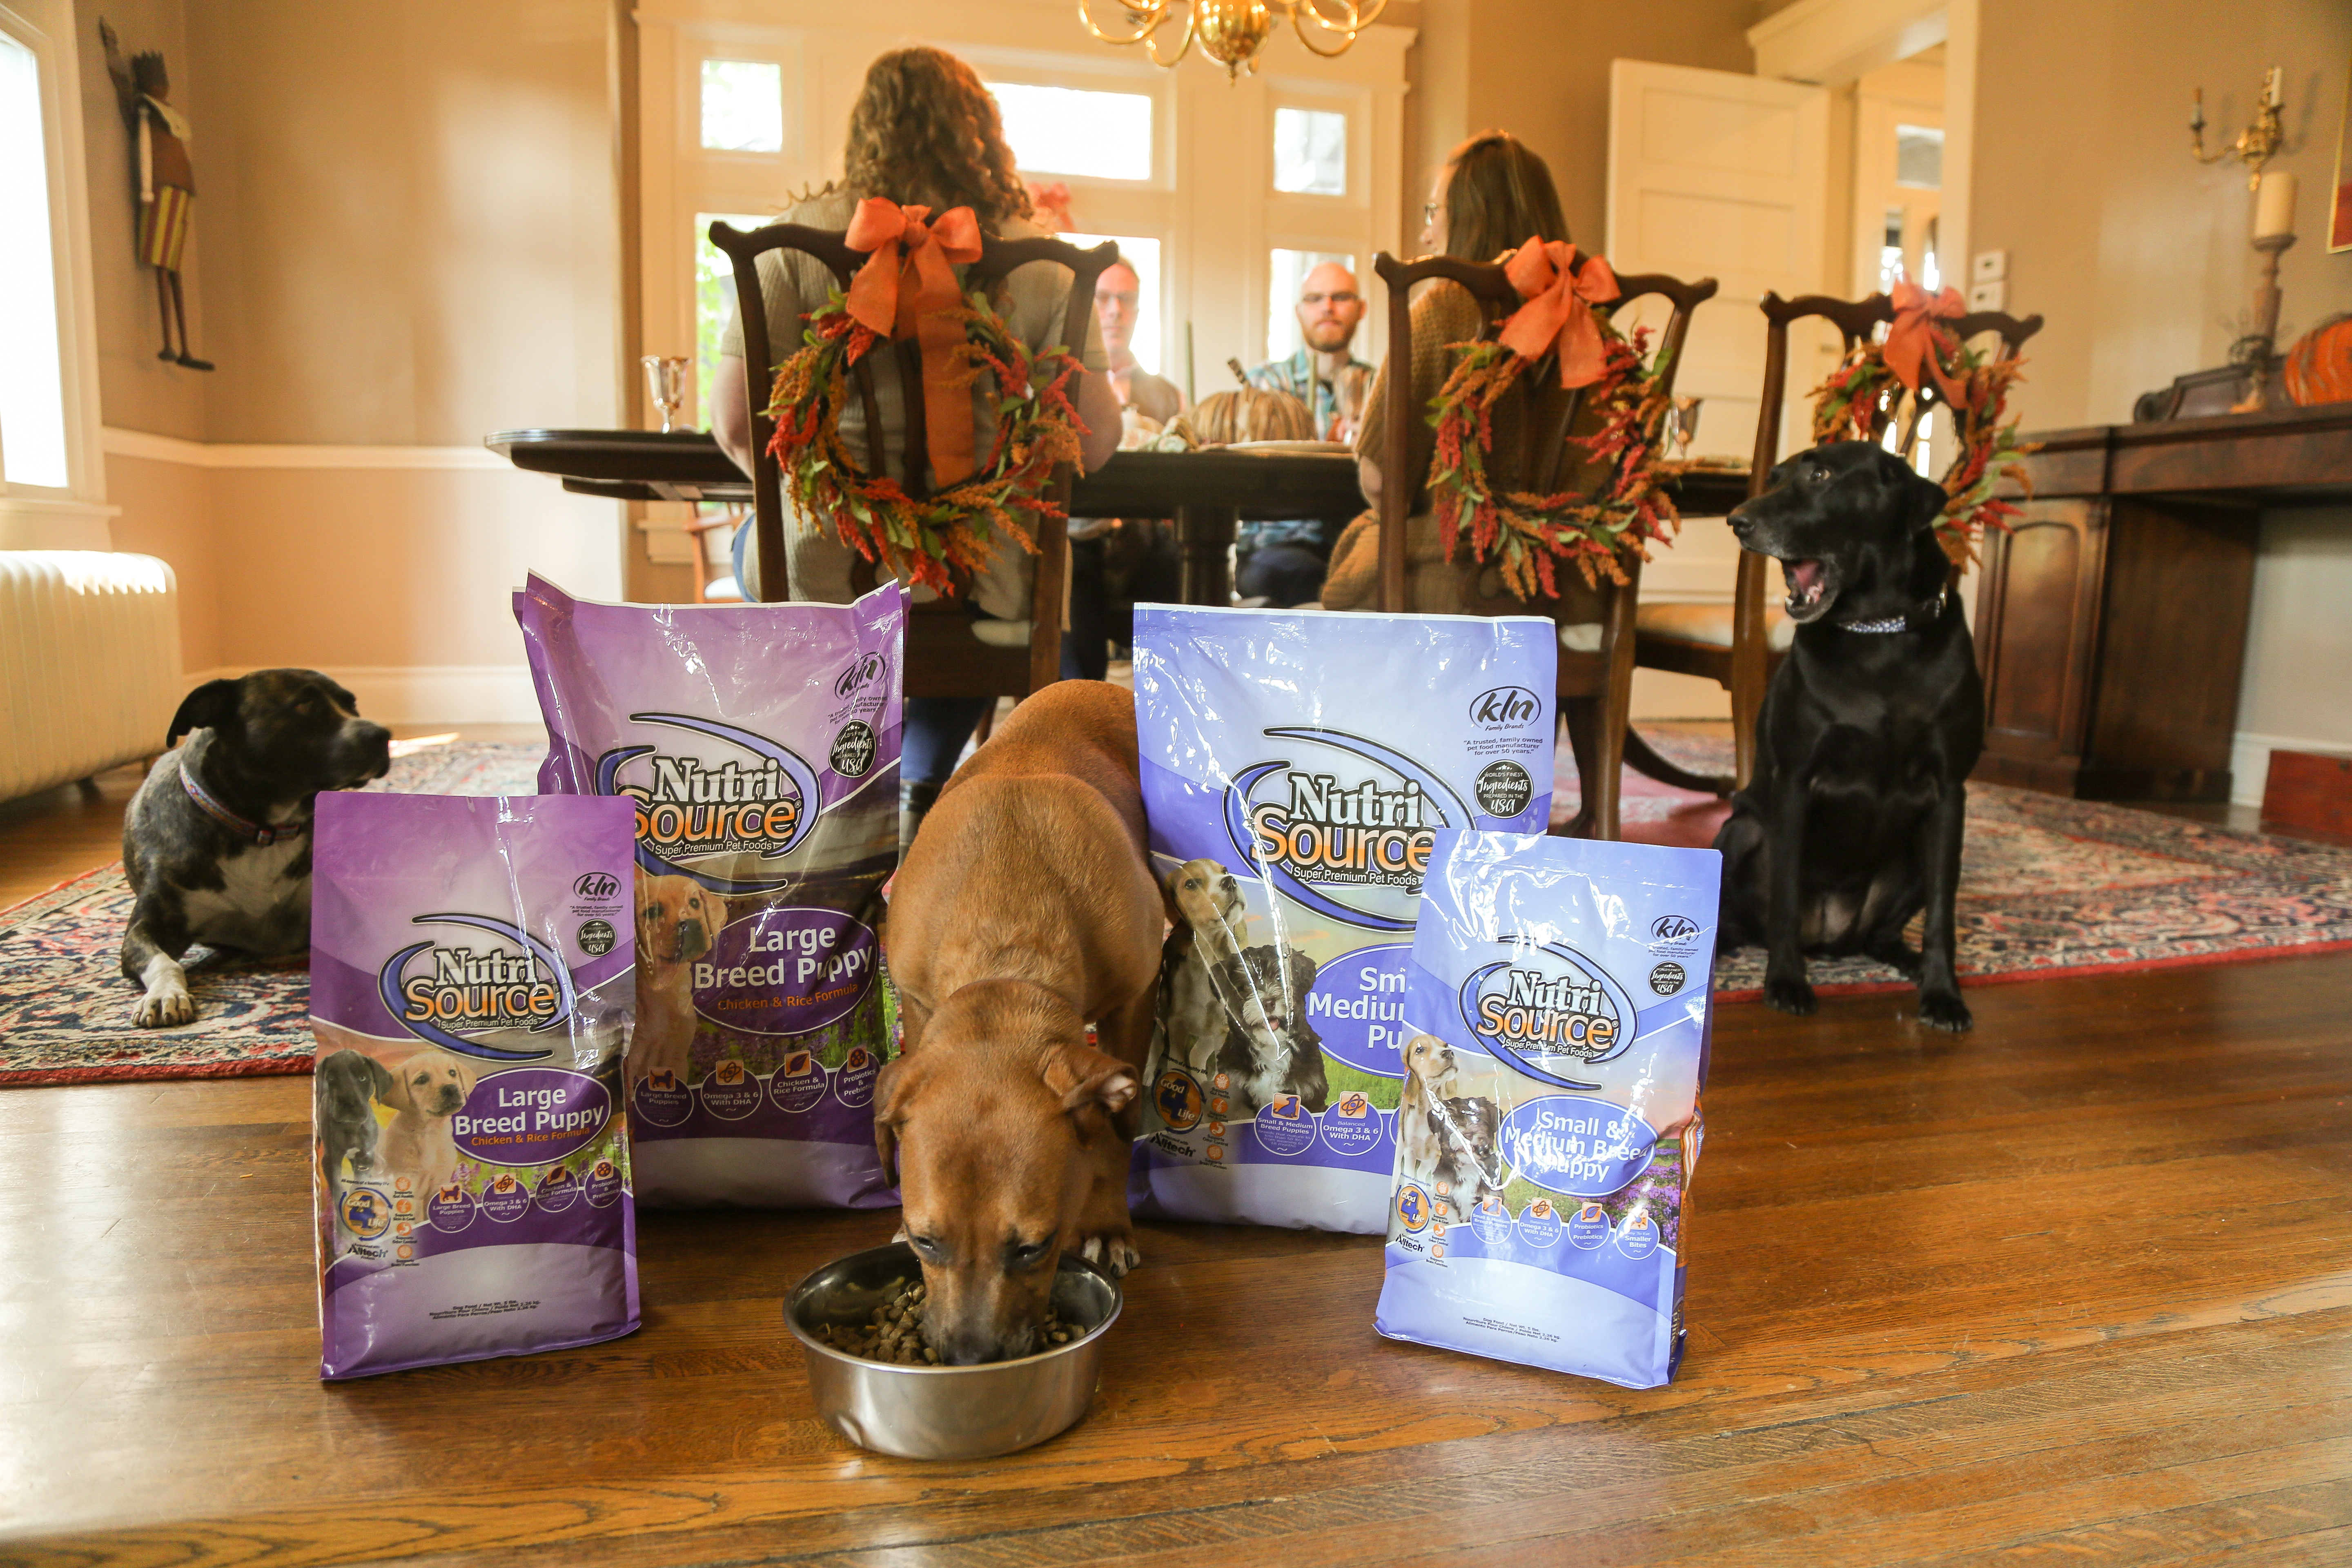 Nutrisource Puppy 5 – 15 lb bags – Buy 1, Get 1 Free